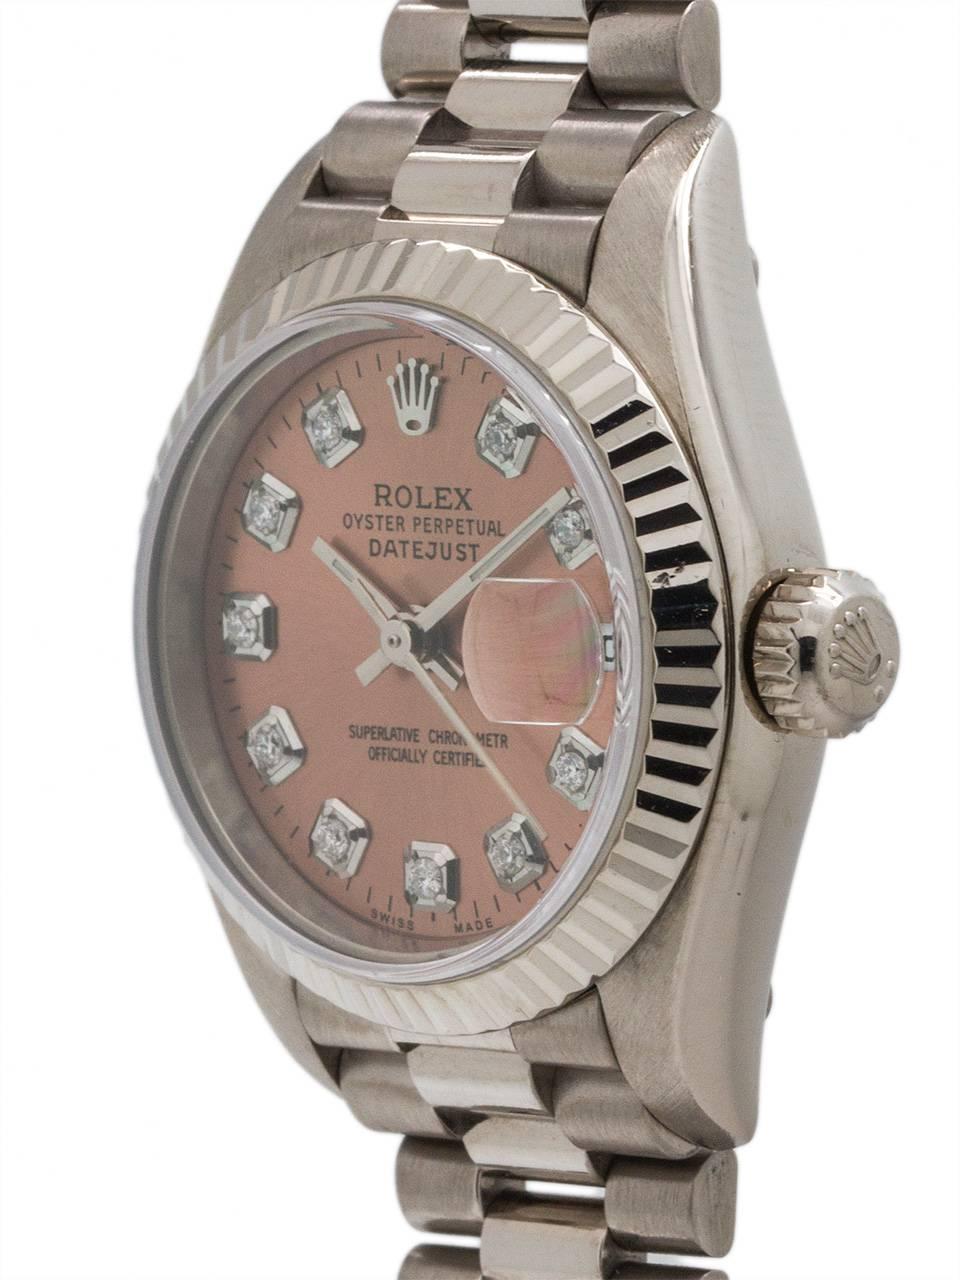 A scarce, vintage Lady Rolex 18K white gold President ref 79174 serial# K4 circa 2001. Featuring a 27mm diameter case with fluted bezel, and sapphire crystal. With custom “Ice Pink” diamond dial with applied diamond indexes & silver baton hands.